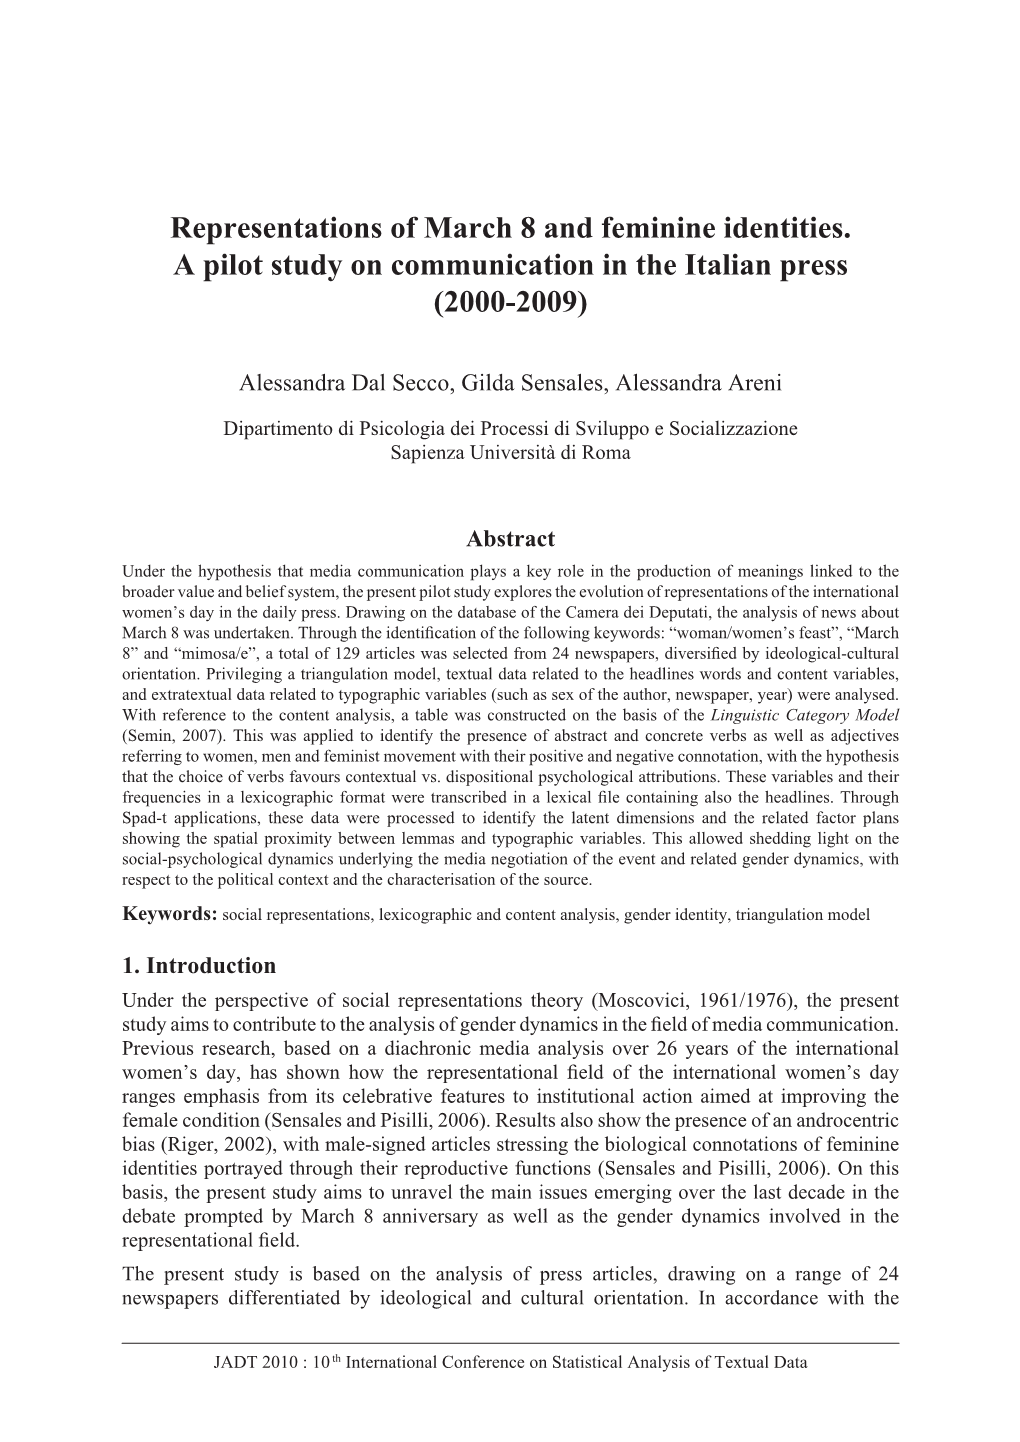 Representations of March 8 and Feminine Identities. a Pilot Study on Communication in the Italian Press (2000-2009)